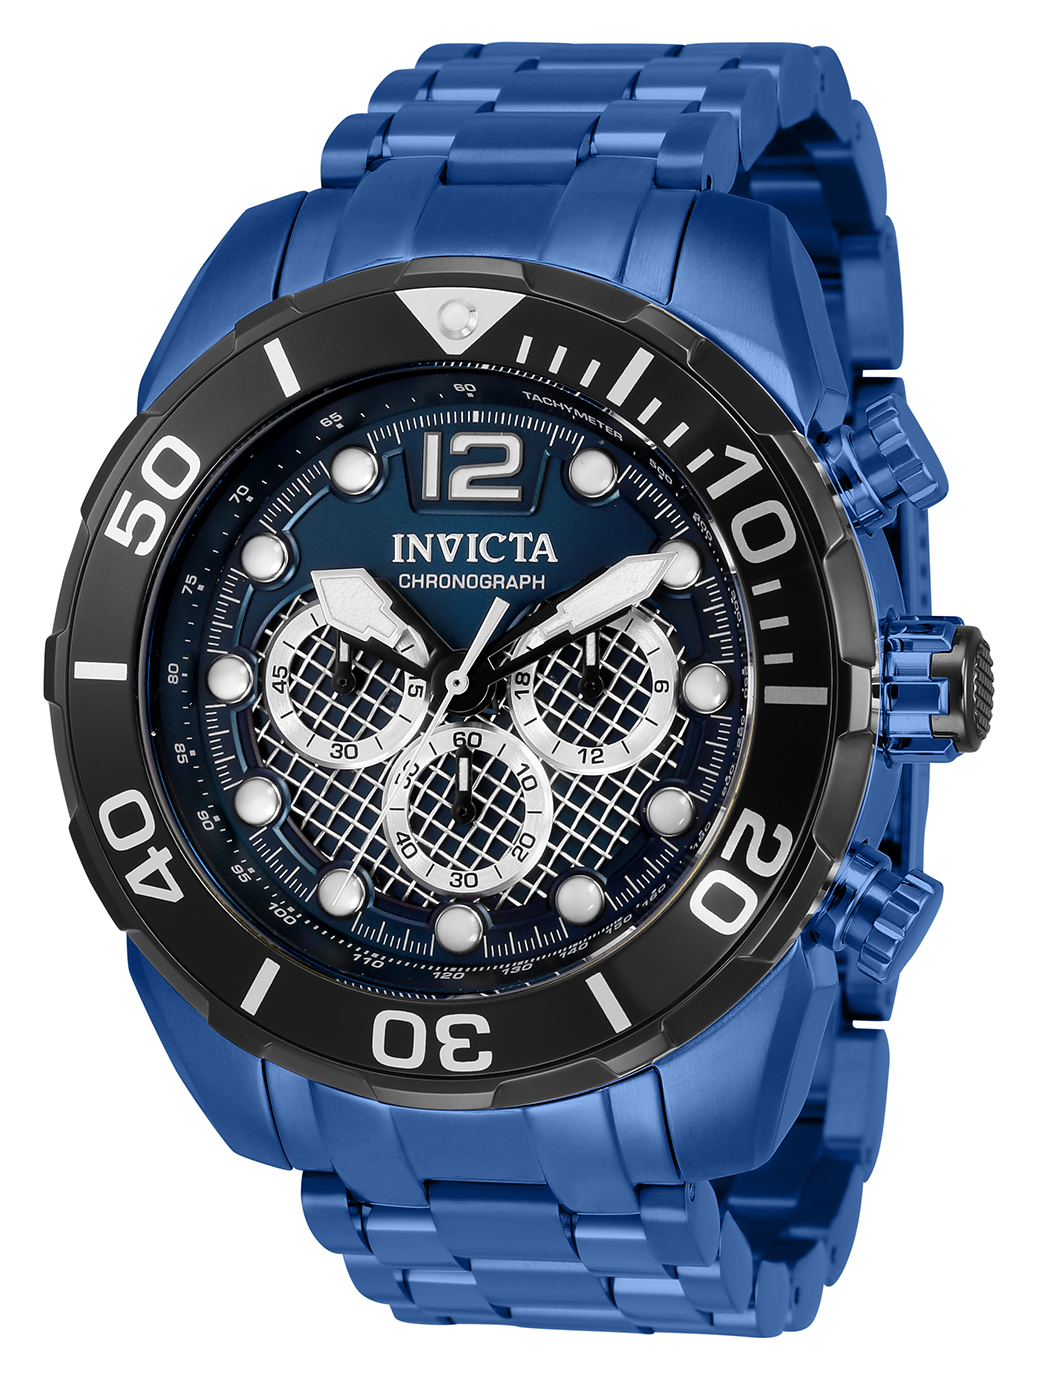 Invicta Pro Diver Quartz Mens Watch - 50mm Stainless Steel Case, Stainless Steel Band, Blue (33832)